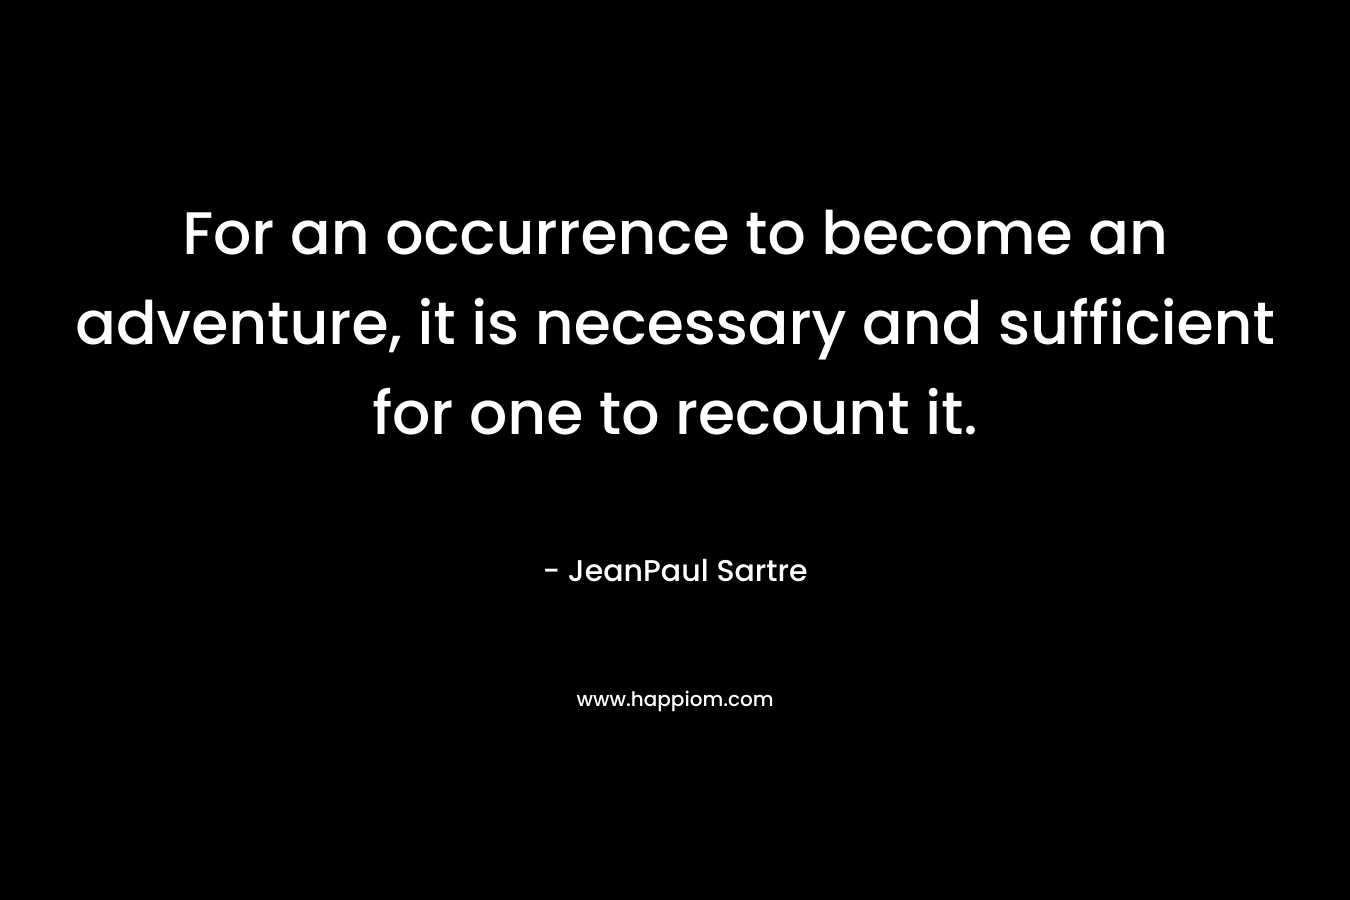 For an occurrence to become an adventure, it is necessary and sufficient for one to recount it. – JeanPaul Sartre